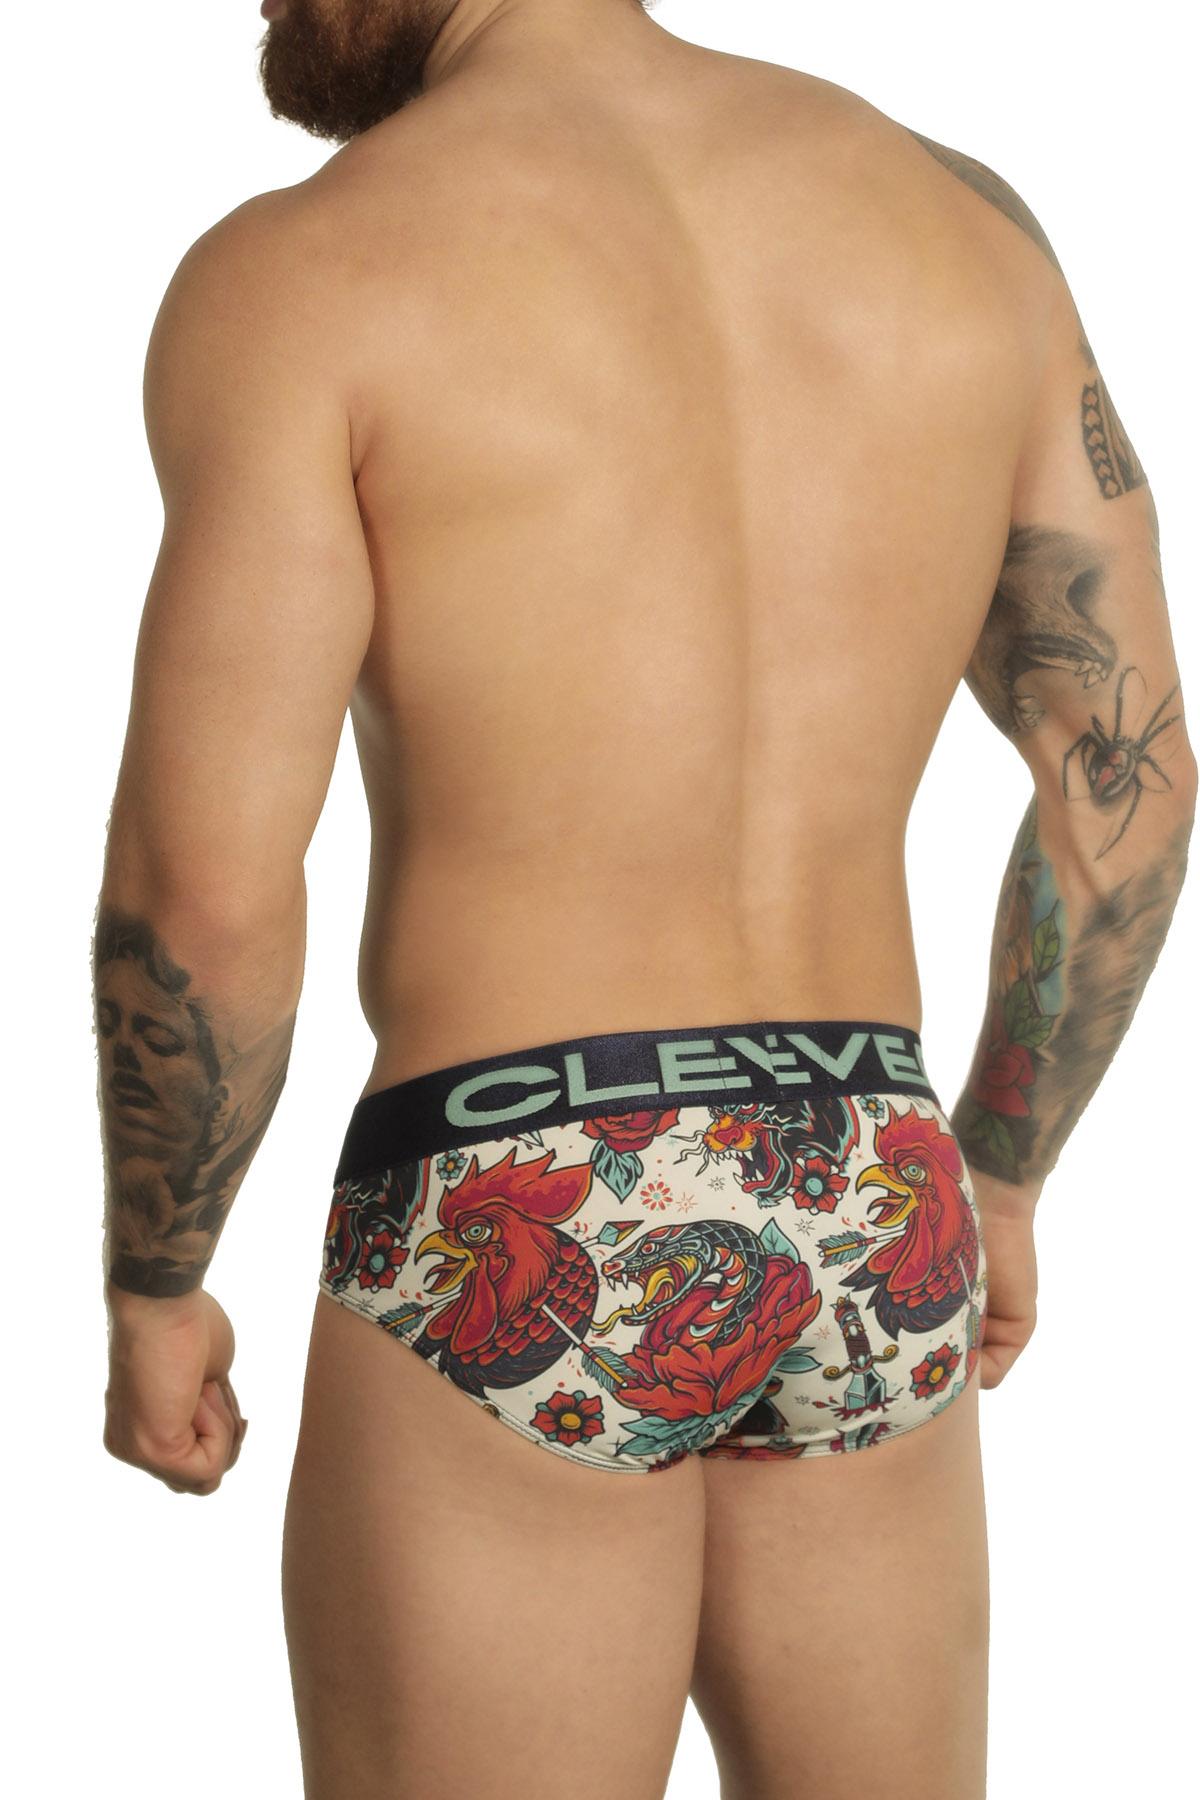 Clever Limited Edition Gold Latin Brief 519903